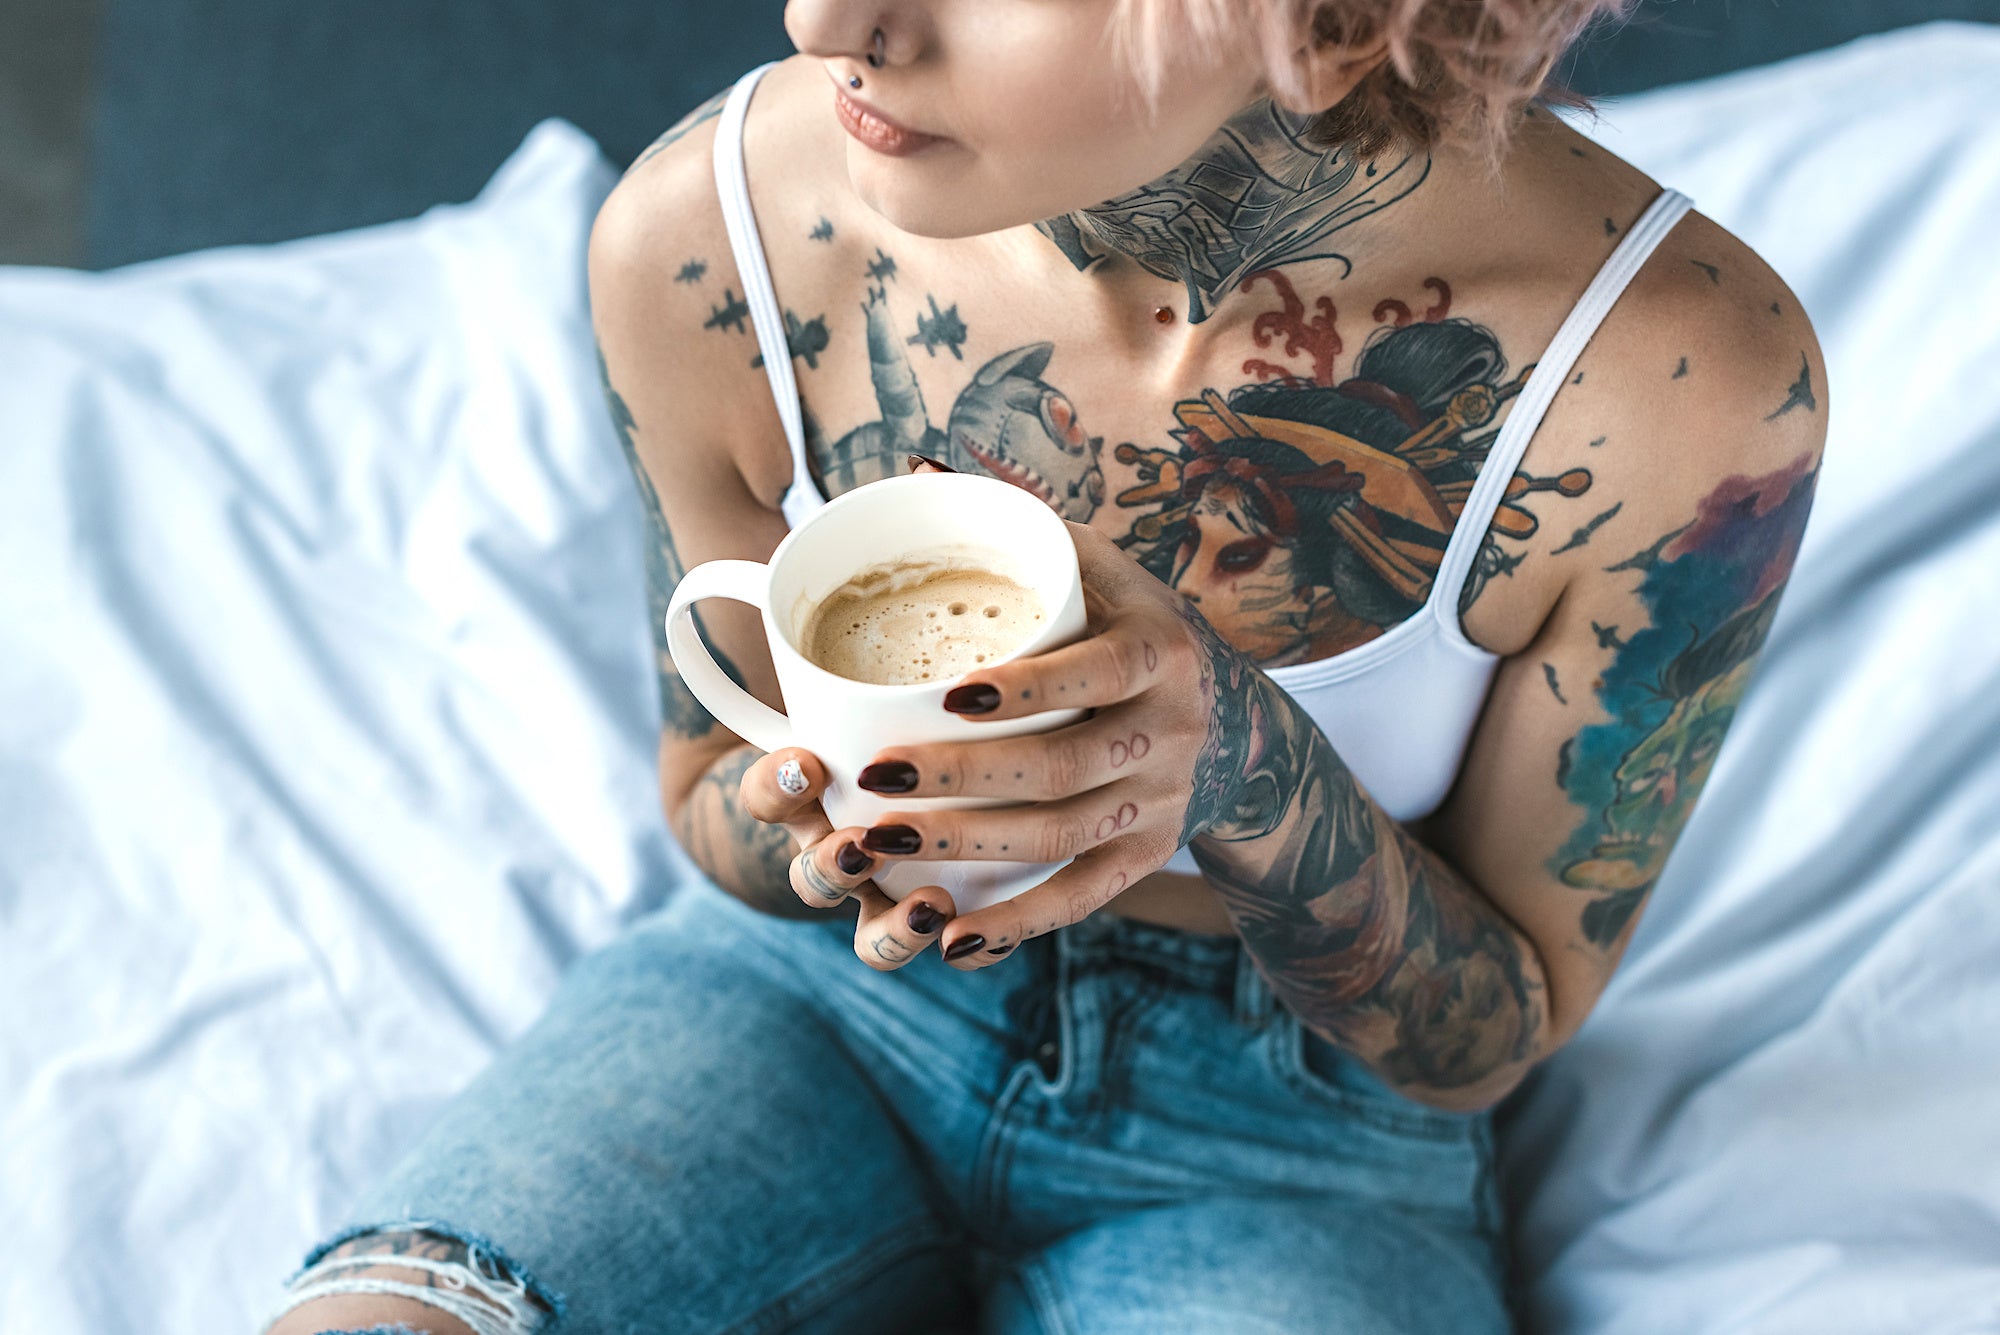 Tattoo Acne: How to Safely Care for Inked Skin